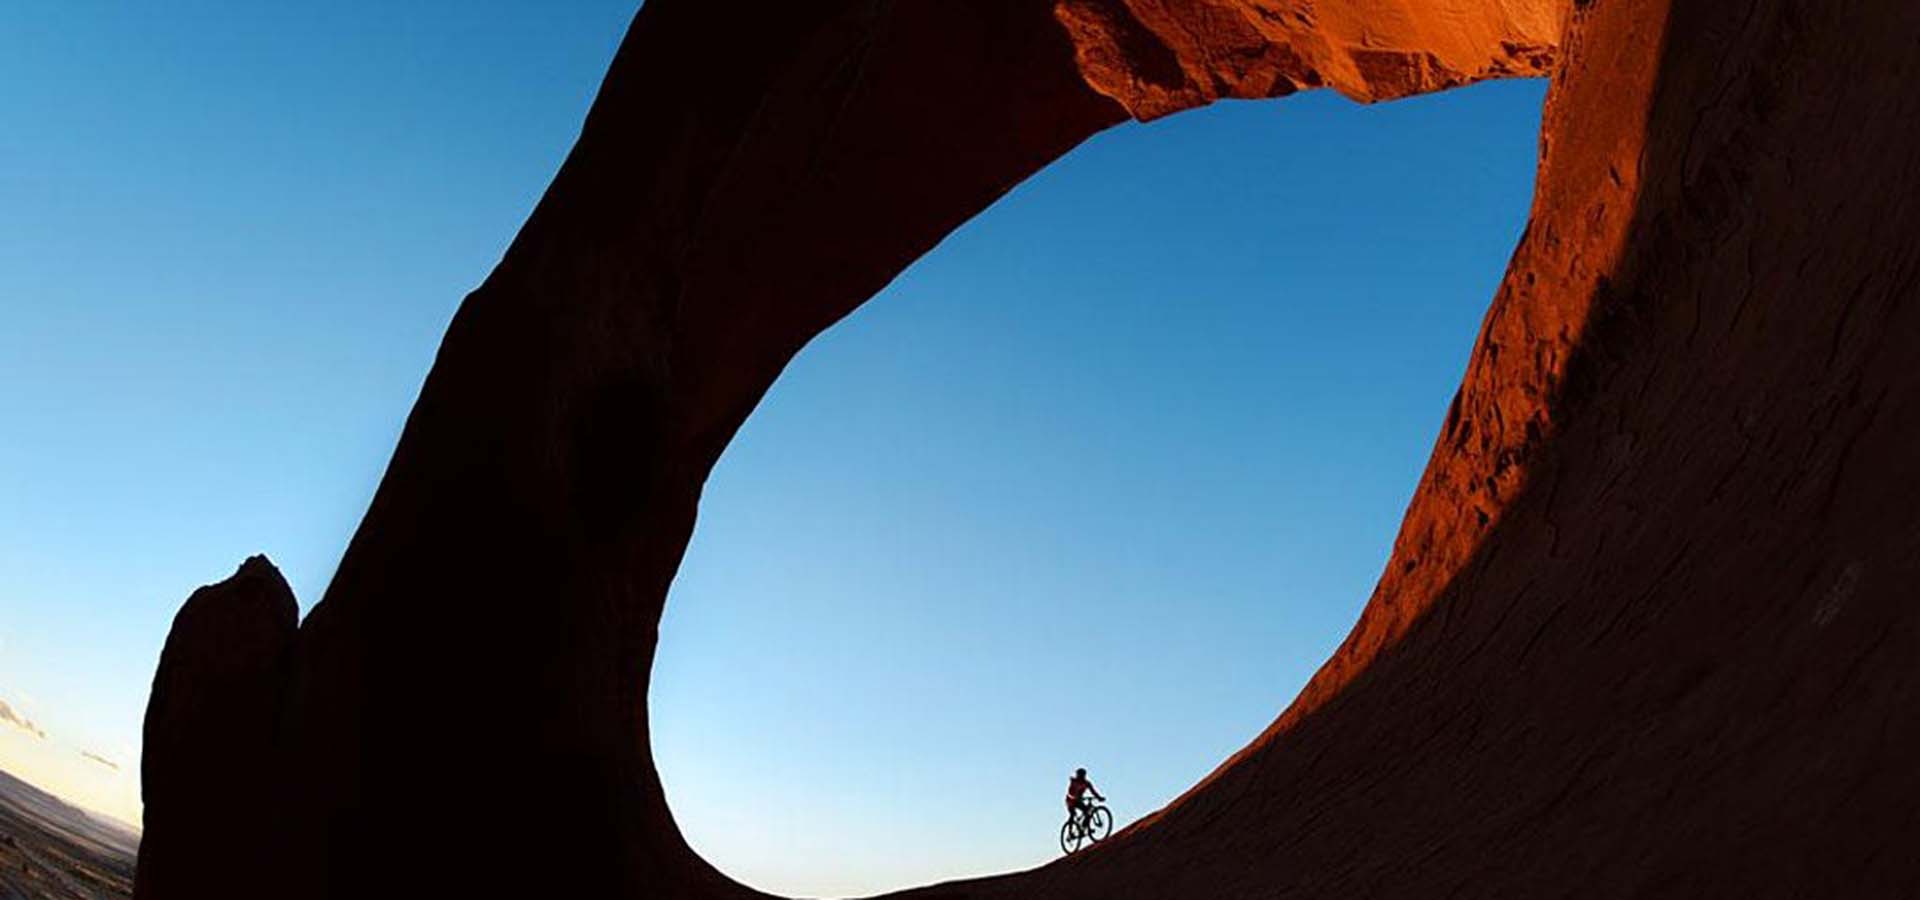 Bike rider riding through a geographical archway